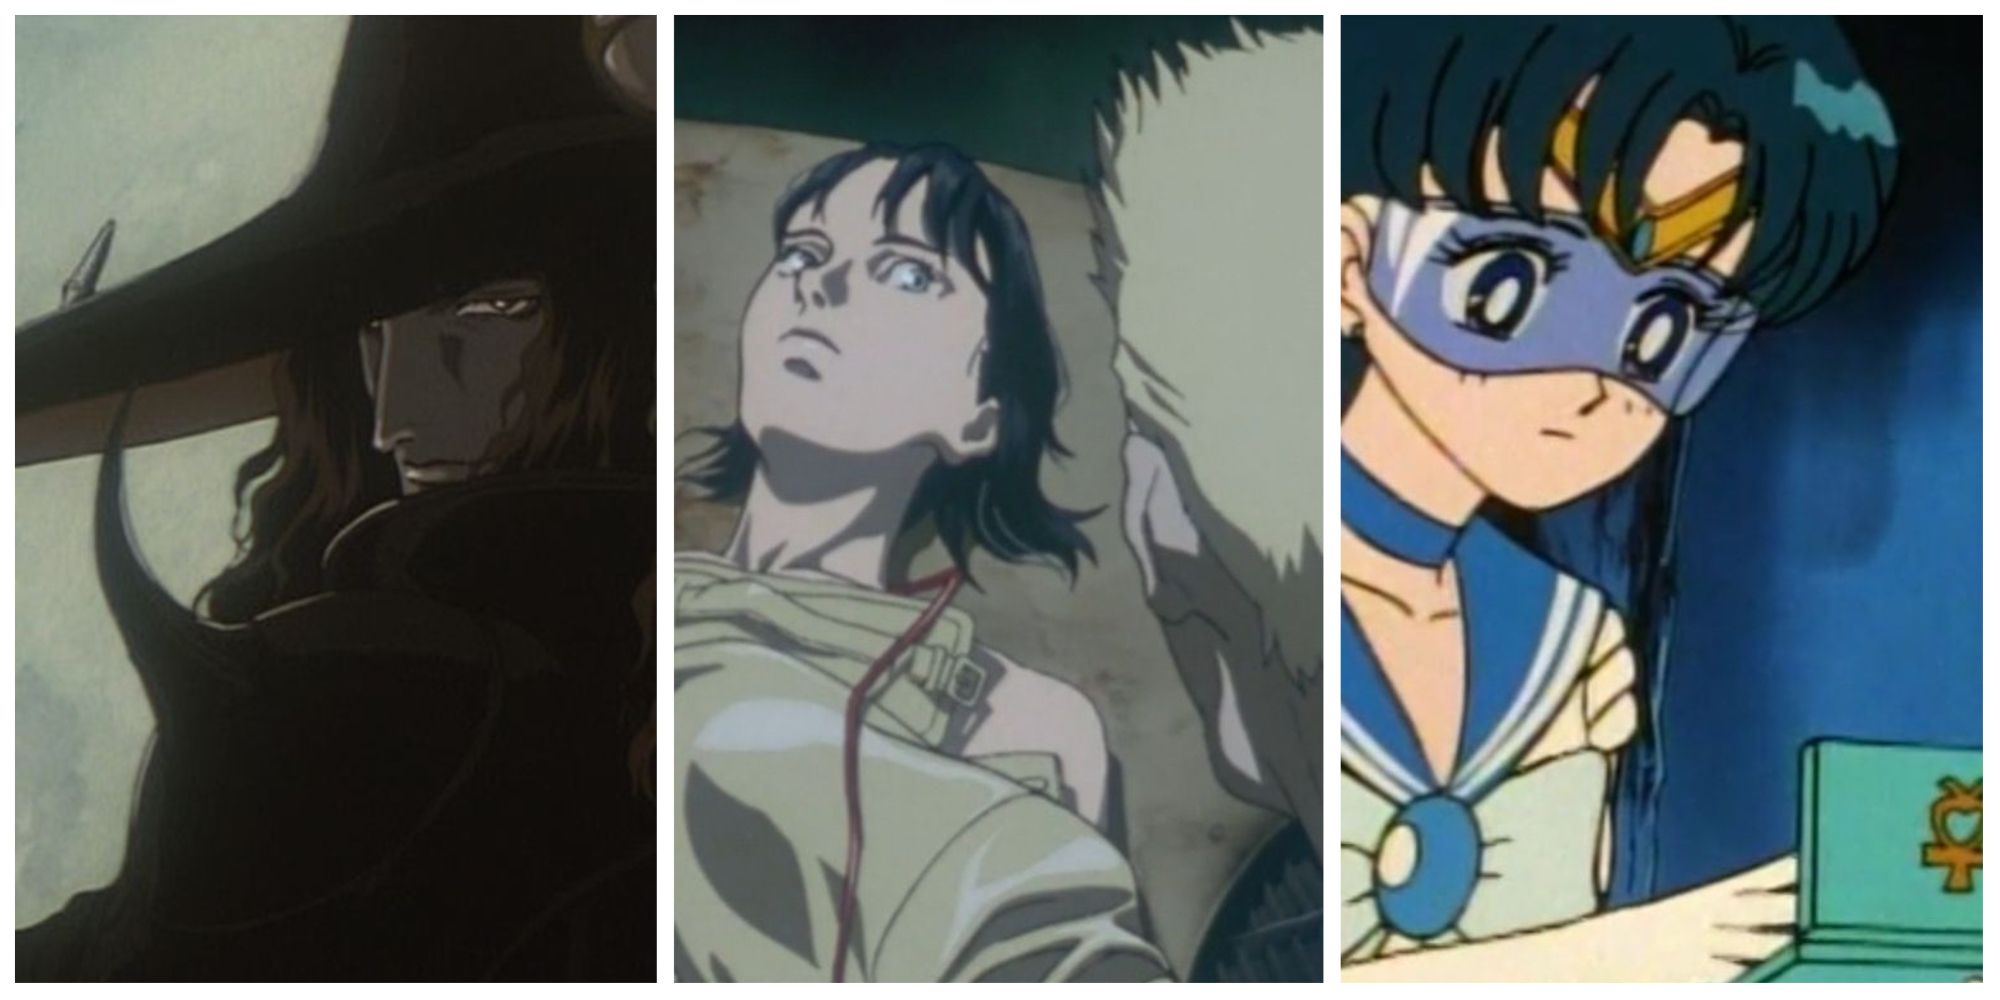 D from Vampire Hunter D: Bloodlust catching an arrow in the moonlight, Kusanagi on a table ready to merge with the Puppet Master and Sailor Mercury using her computer